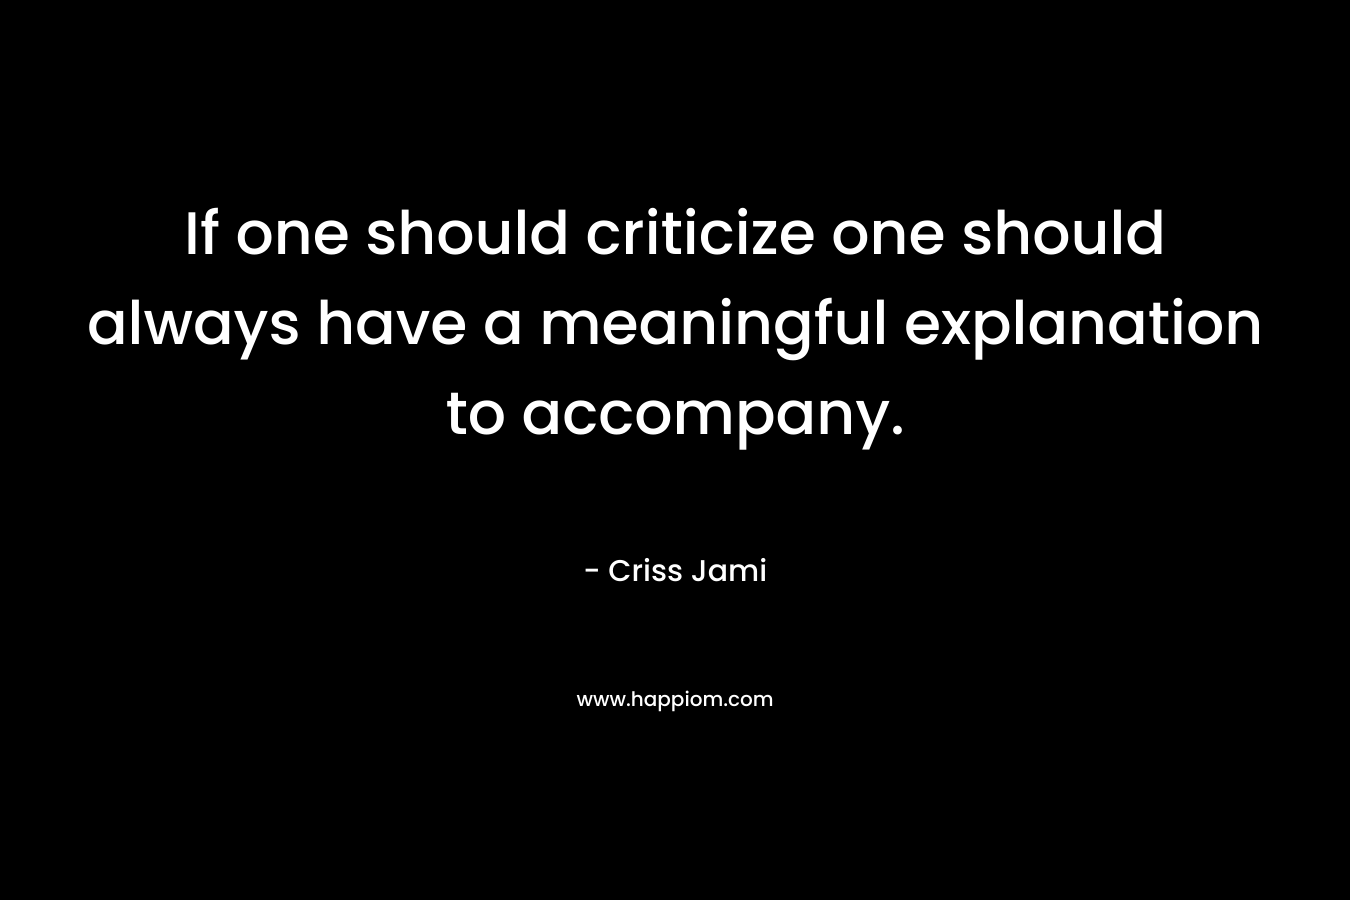 If one should criticize one should always have a meaningful explanation to accompany.